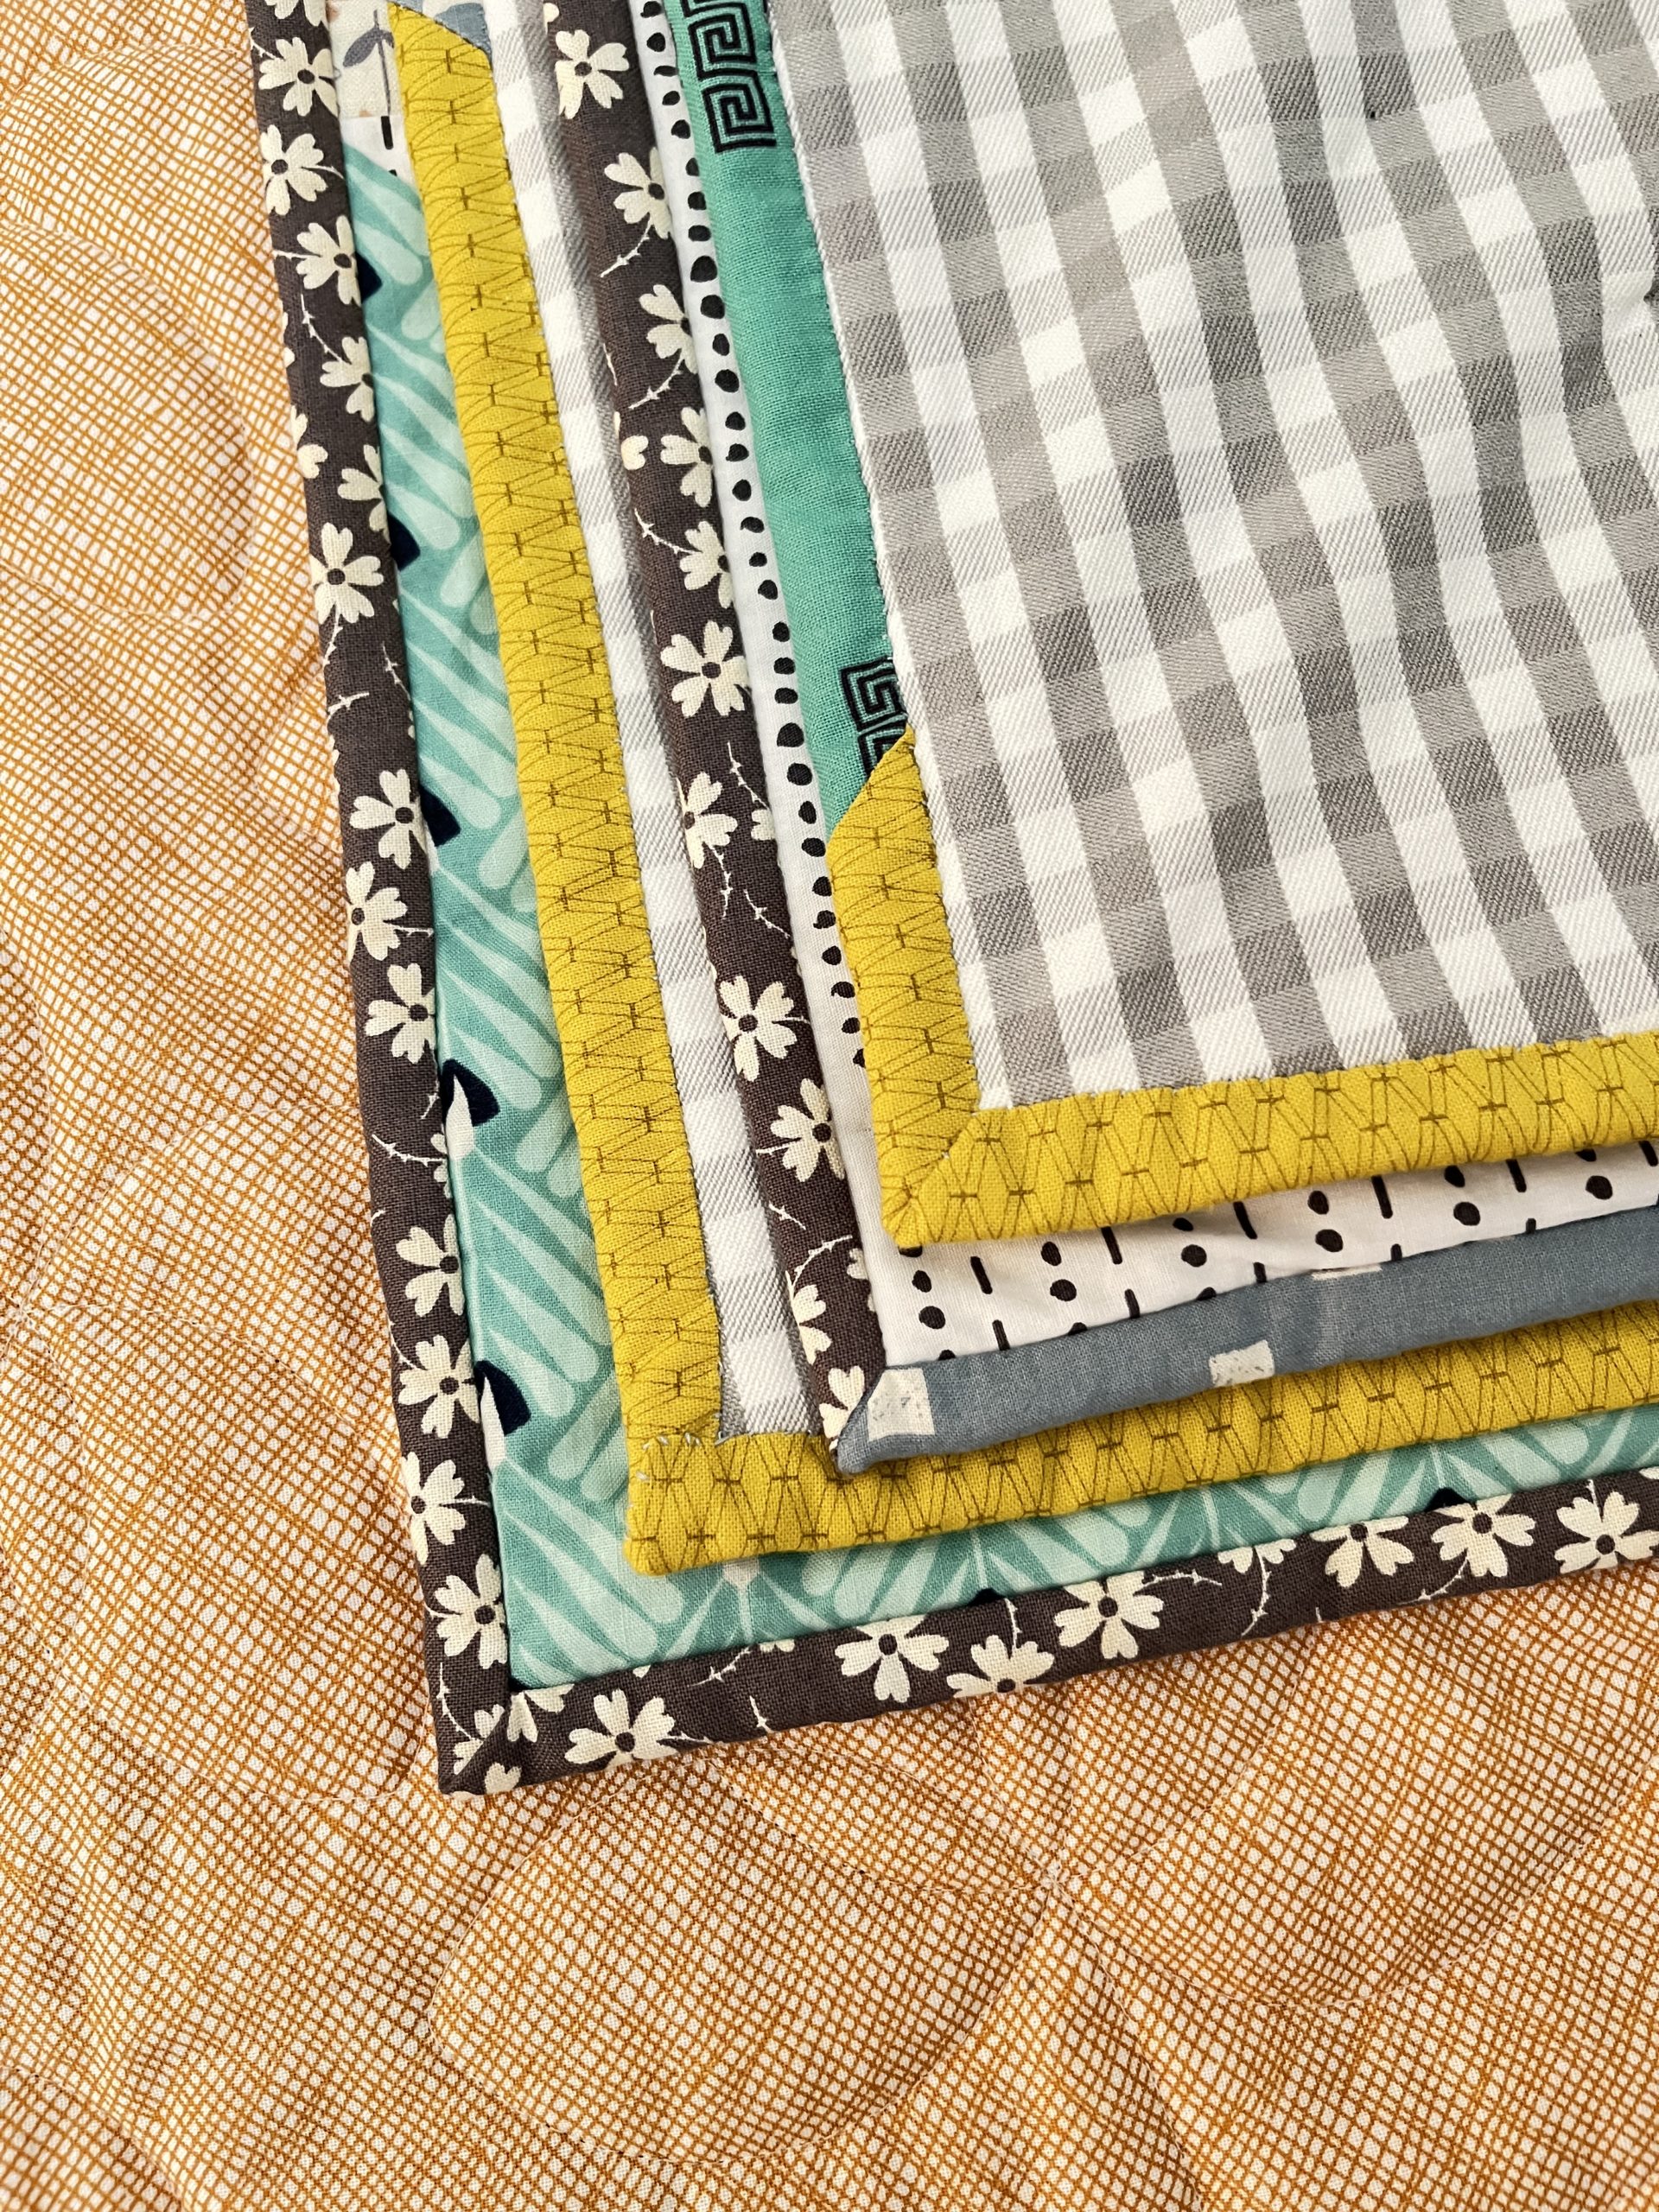 How to make a scrappy quilt binding